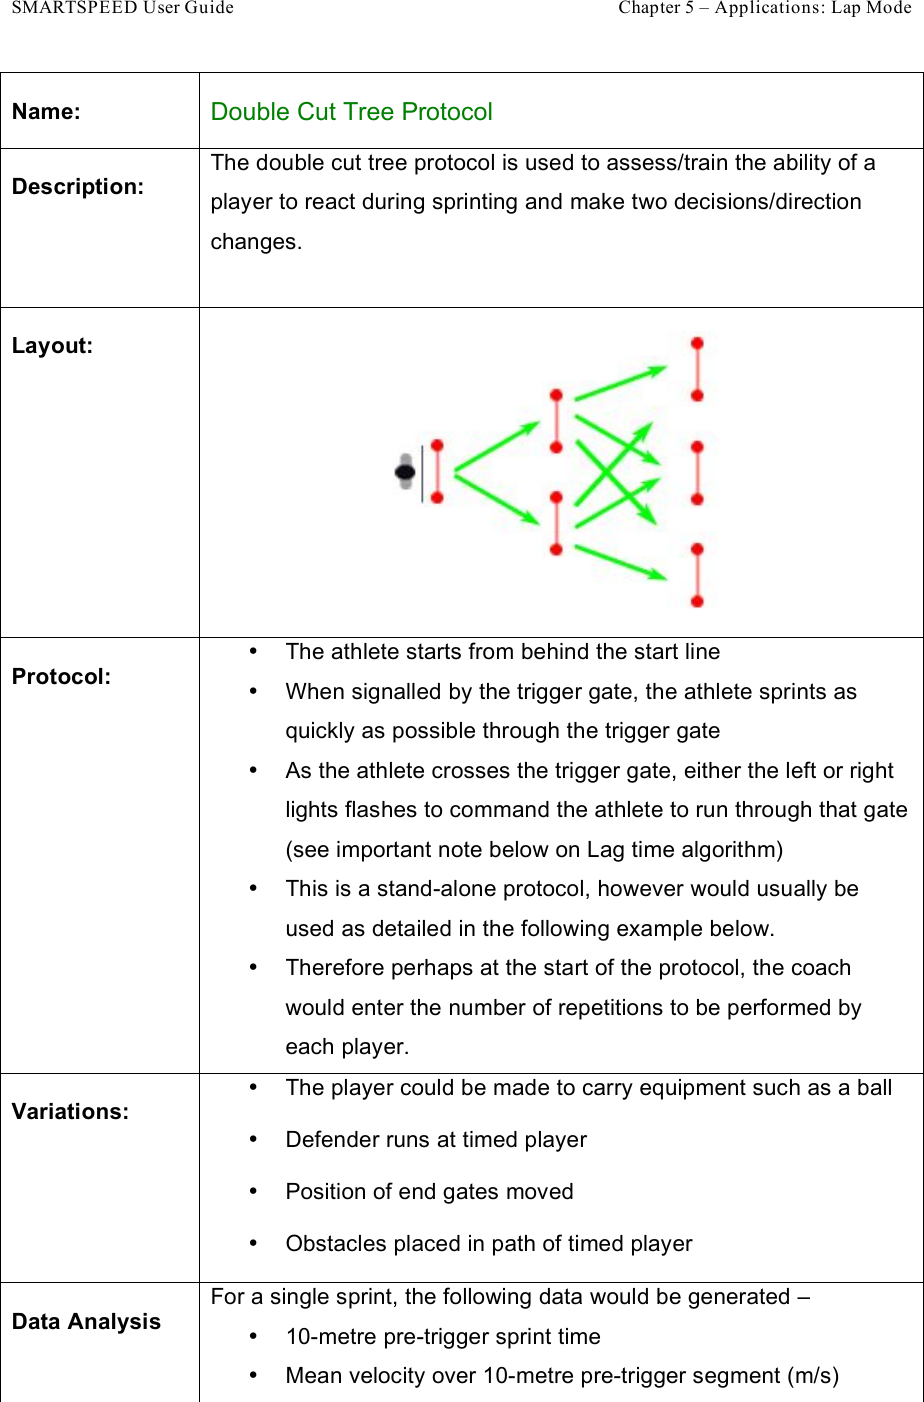 SMARTSPEED User Guide    Chapter 5 – Applications: Lap Mode Name: Double Cut Tree Protocol Description: The double cut tree protocol is used to assess/train the ability of a player to react during sprinting and make two decisions/direction changes.   Layout:  Protocol: •  The athlete starts from behind the start line •  When signalled by the trigger gate, the athlete sprints as quickly as possible through the trigger gate •  As the athlete crosses the trigger gate, either the left or right lights flashes to command the athlete to run through that gate (see important note below on Lag time algorithm) •  This is a stand-alone protocol, however would usually be used as detailed in the following example below. •  Therefore perhaps at the start of the protocol, the coach would enter the number of repetitions to be performed by each player. Variations: •  The player could be made to carry equipment such as a ball •  Defender runs at timed player •  Position of end gates moved •  Obstacles placed in path of timed player Data Analysis For a single sprint, the following data would be generated –  •  10-metre pre-trigger sprint time •  Mean velocity over 10-metre pre-trigger segment (m/s) 